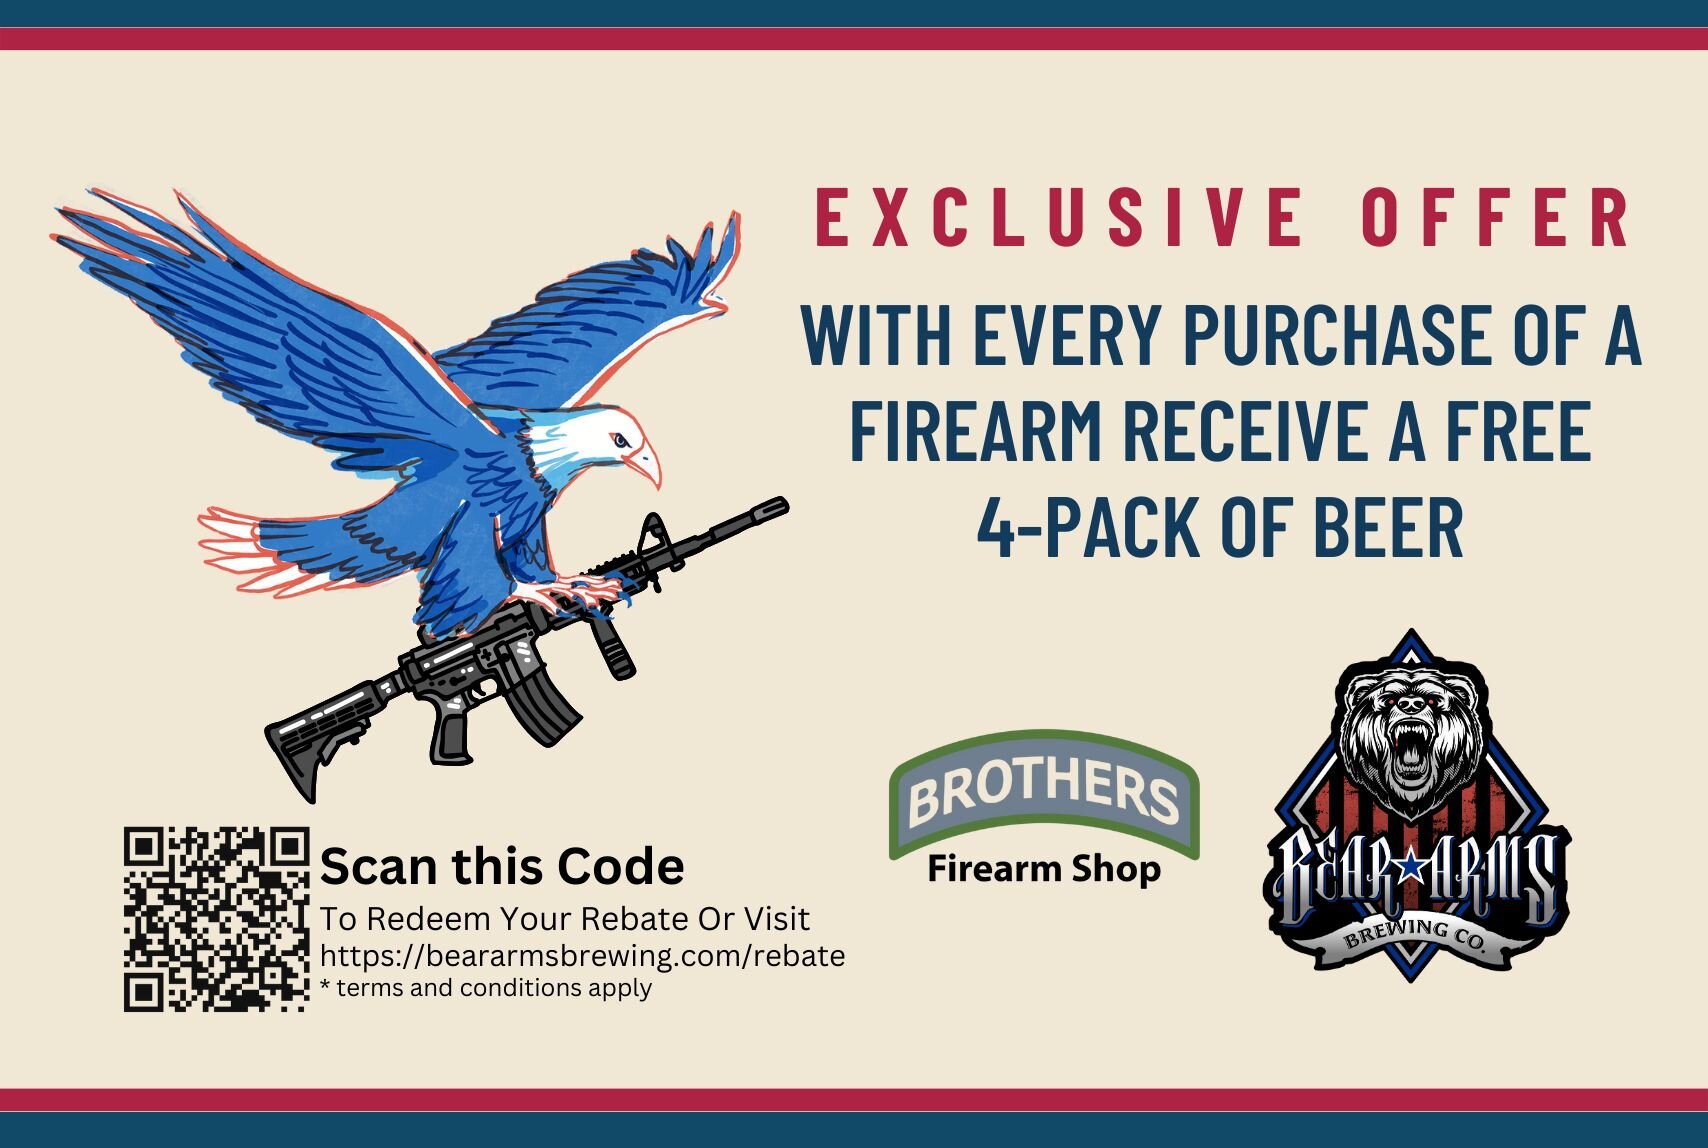 Eagle flying with an AR-15 and text describing Beer Rebate Offer from Brothers Firearm Shop and Bear Arms Brewing Company 